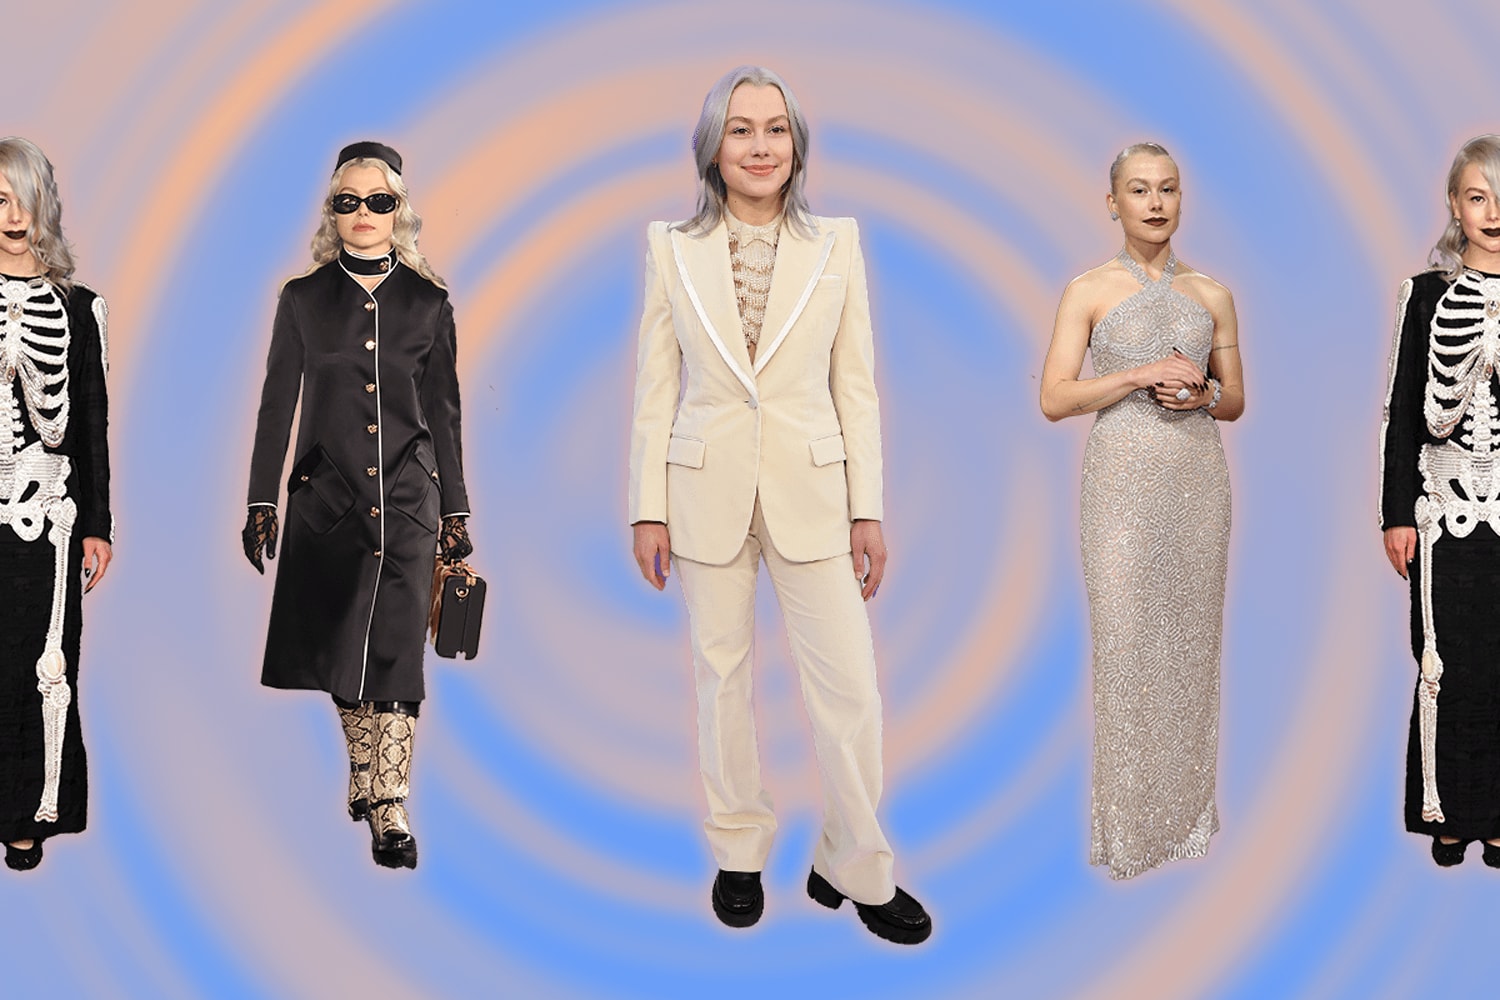 A guide to Phoebe Bridgers’ meta goth personal style